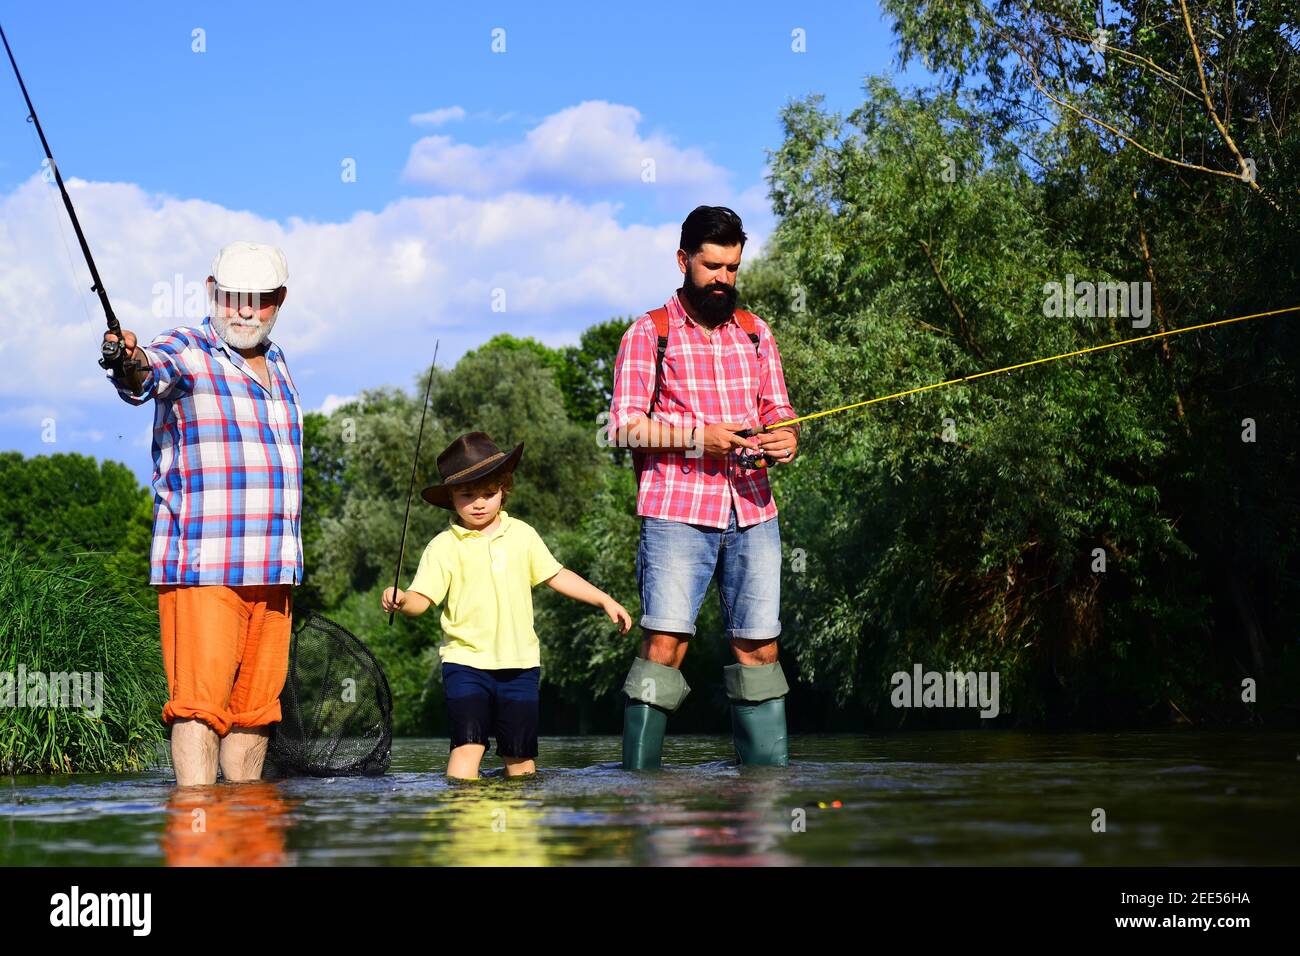 Happy Teen Boys Go Fishing on the River, Children of the Fisherman with a Fishing  Rod on the Shore of Lake Stock Photo - Image of caucasian, happy: 199404556